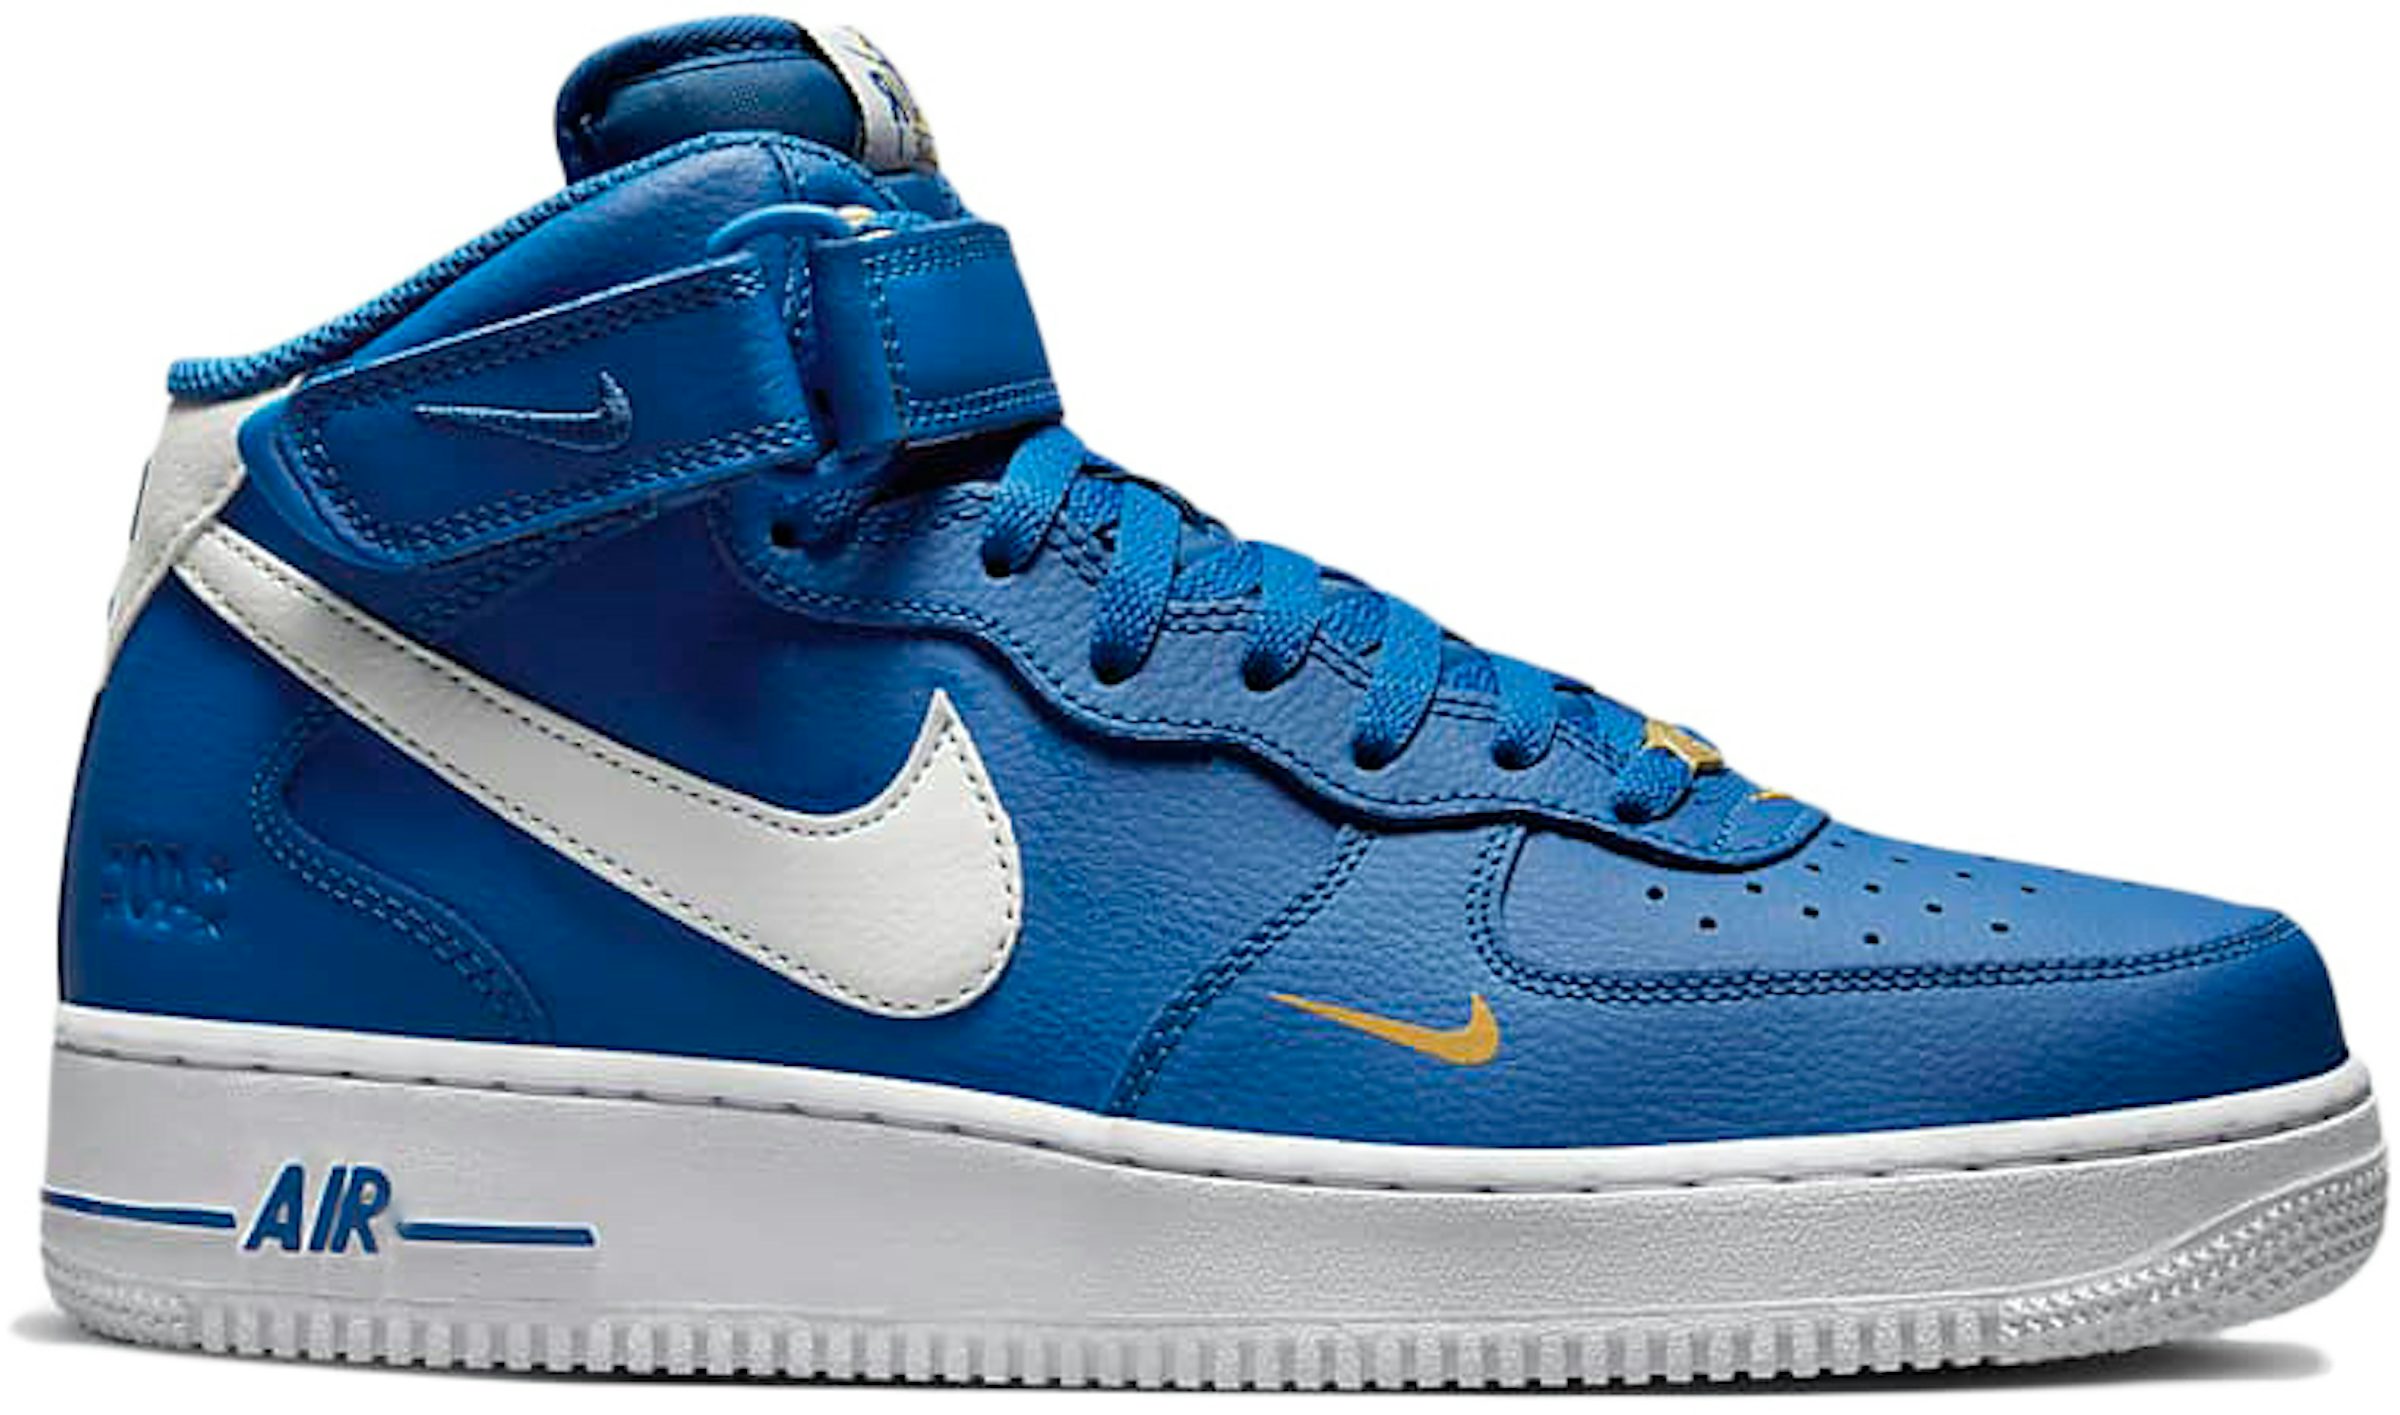 NIKE AIR FORCE 1 MID '07 LV8 40TH ANNIVERSARY – Wanderluxstyle